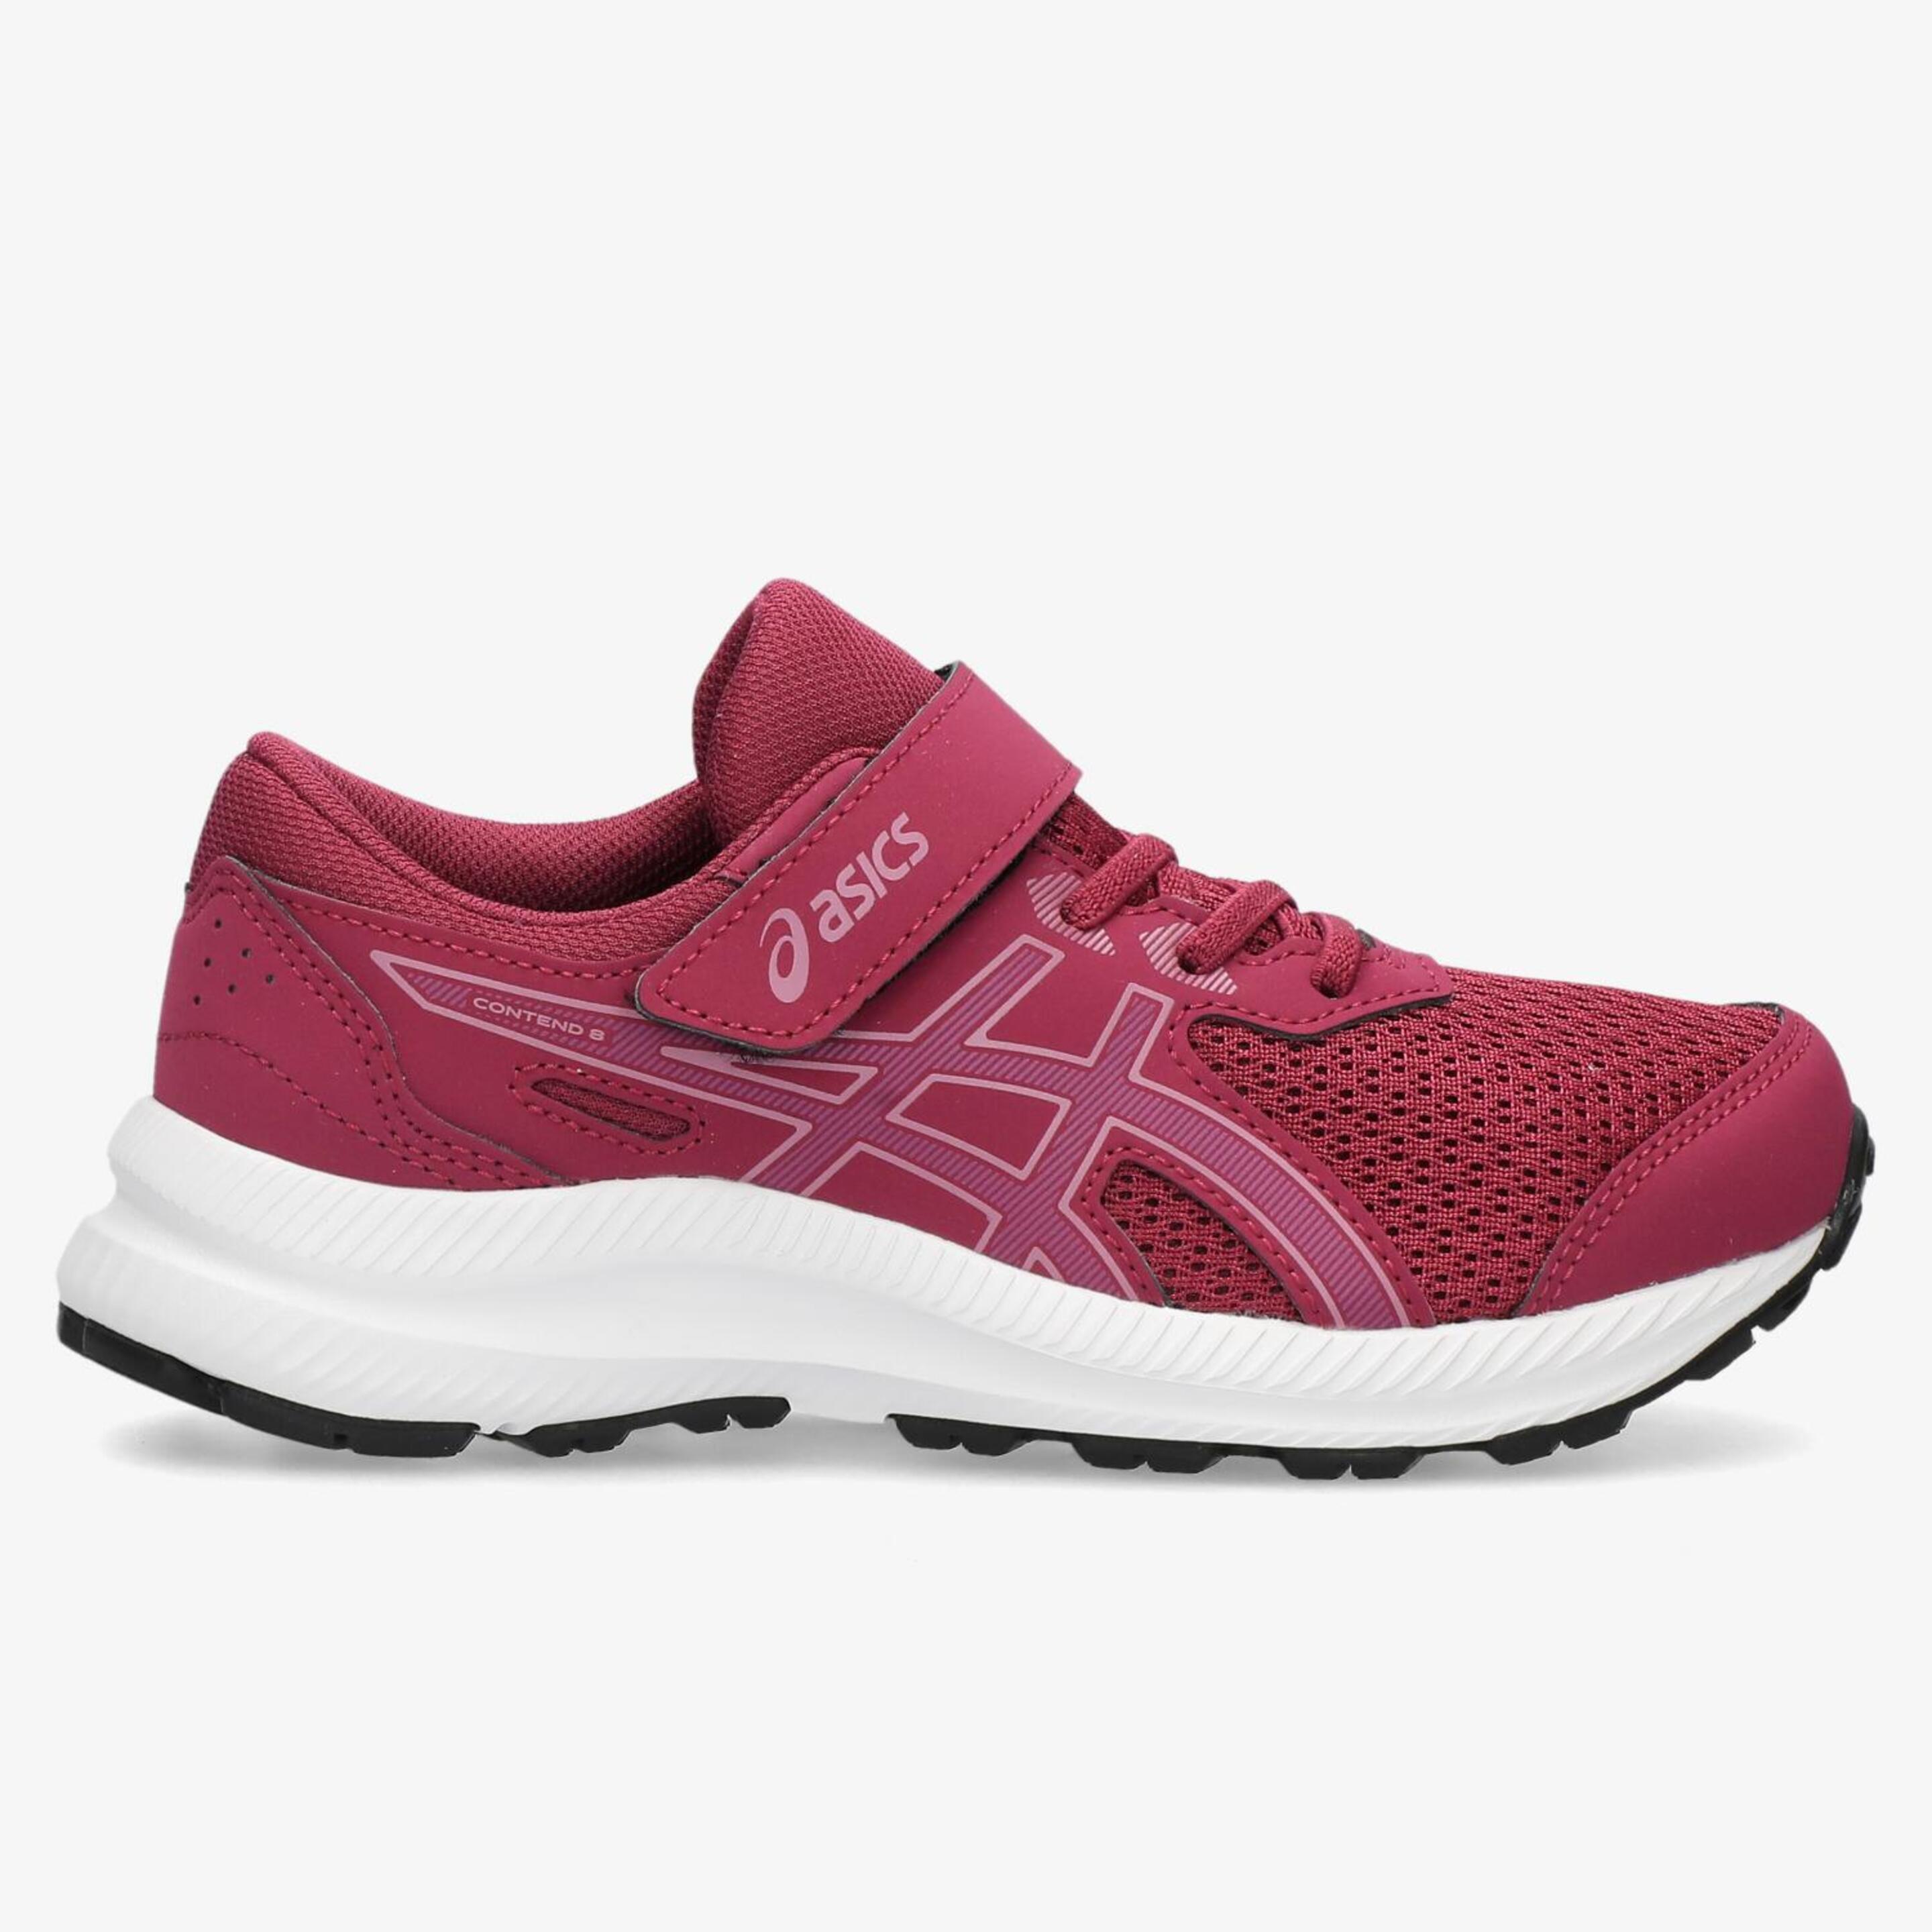 ASICS Contend 8 Ps